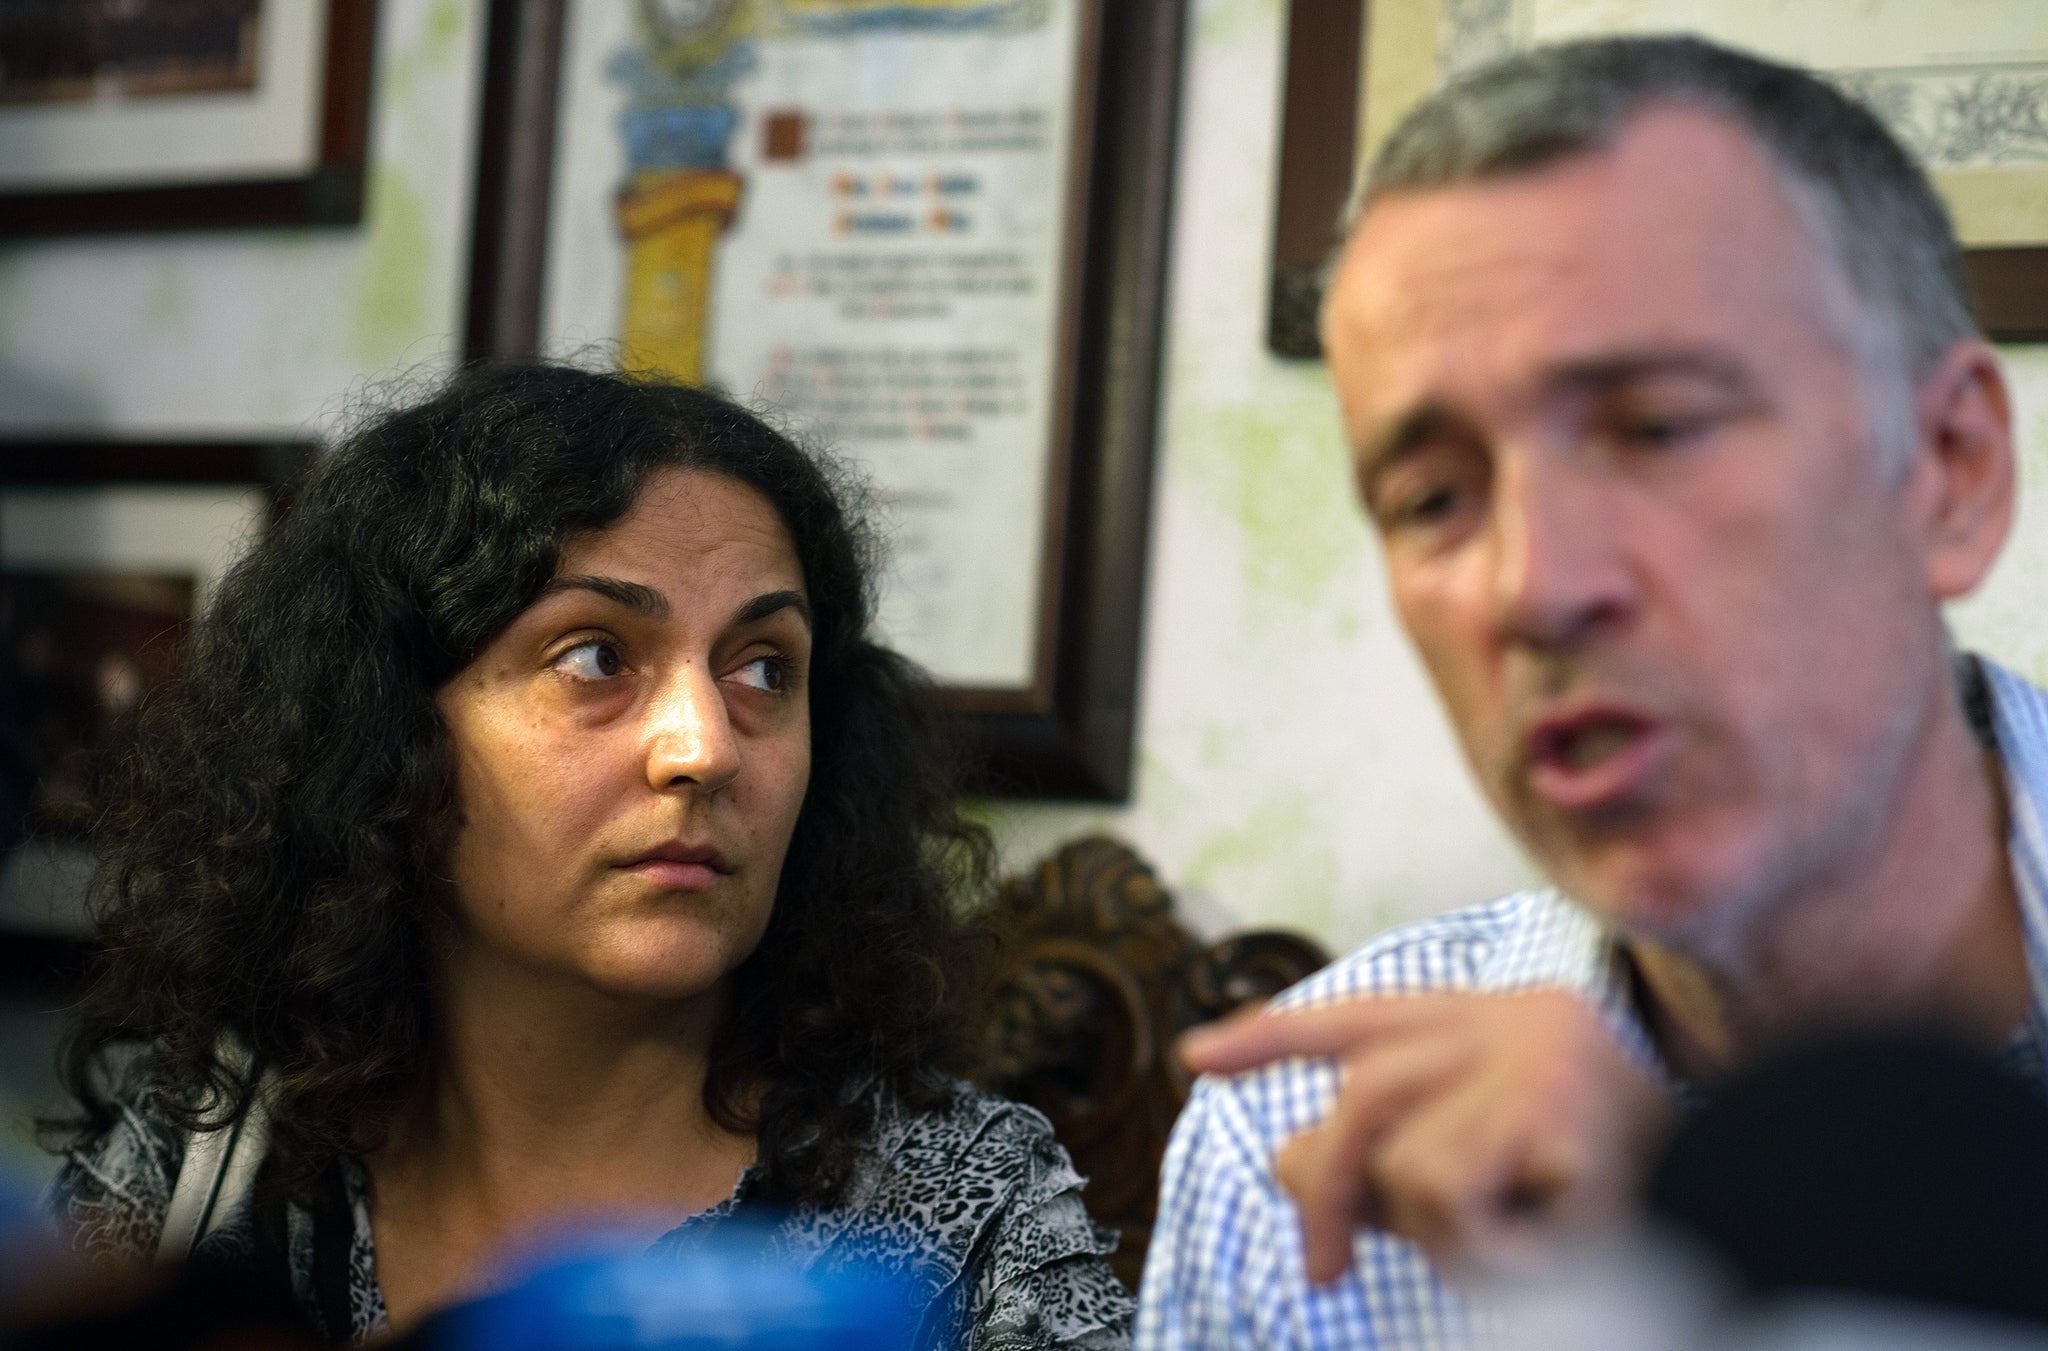 Ashya King was reunited with his parents Brett and Naghmeh yesterday